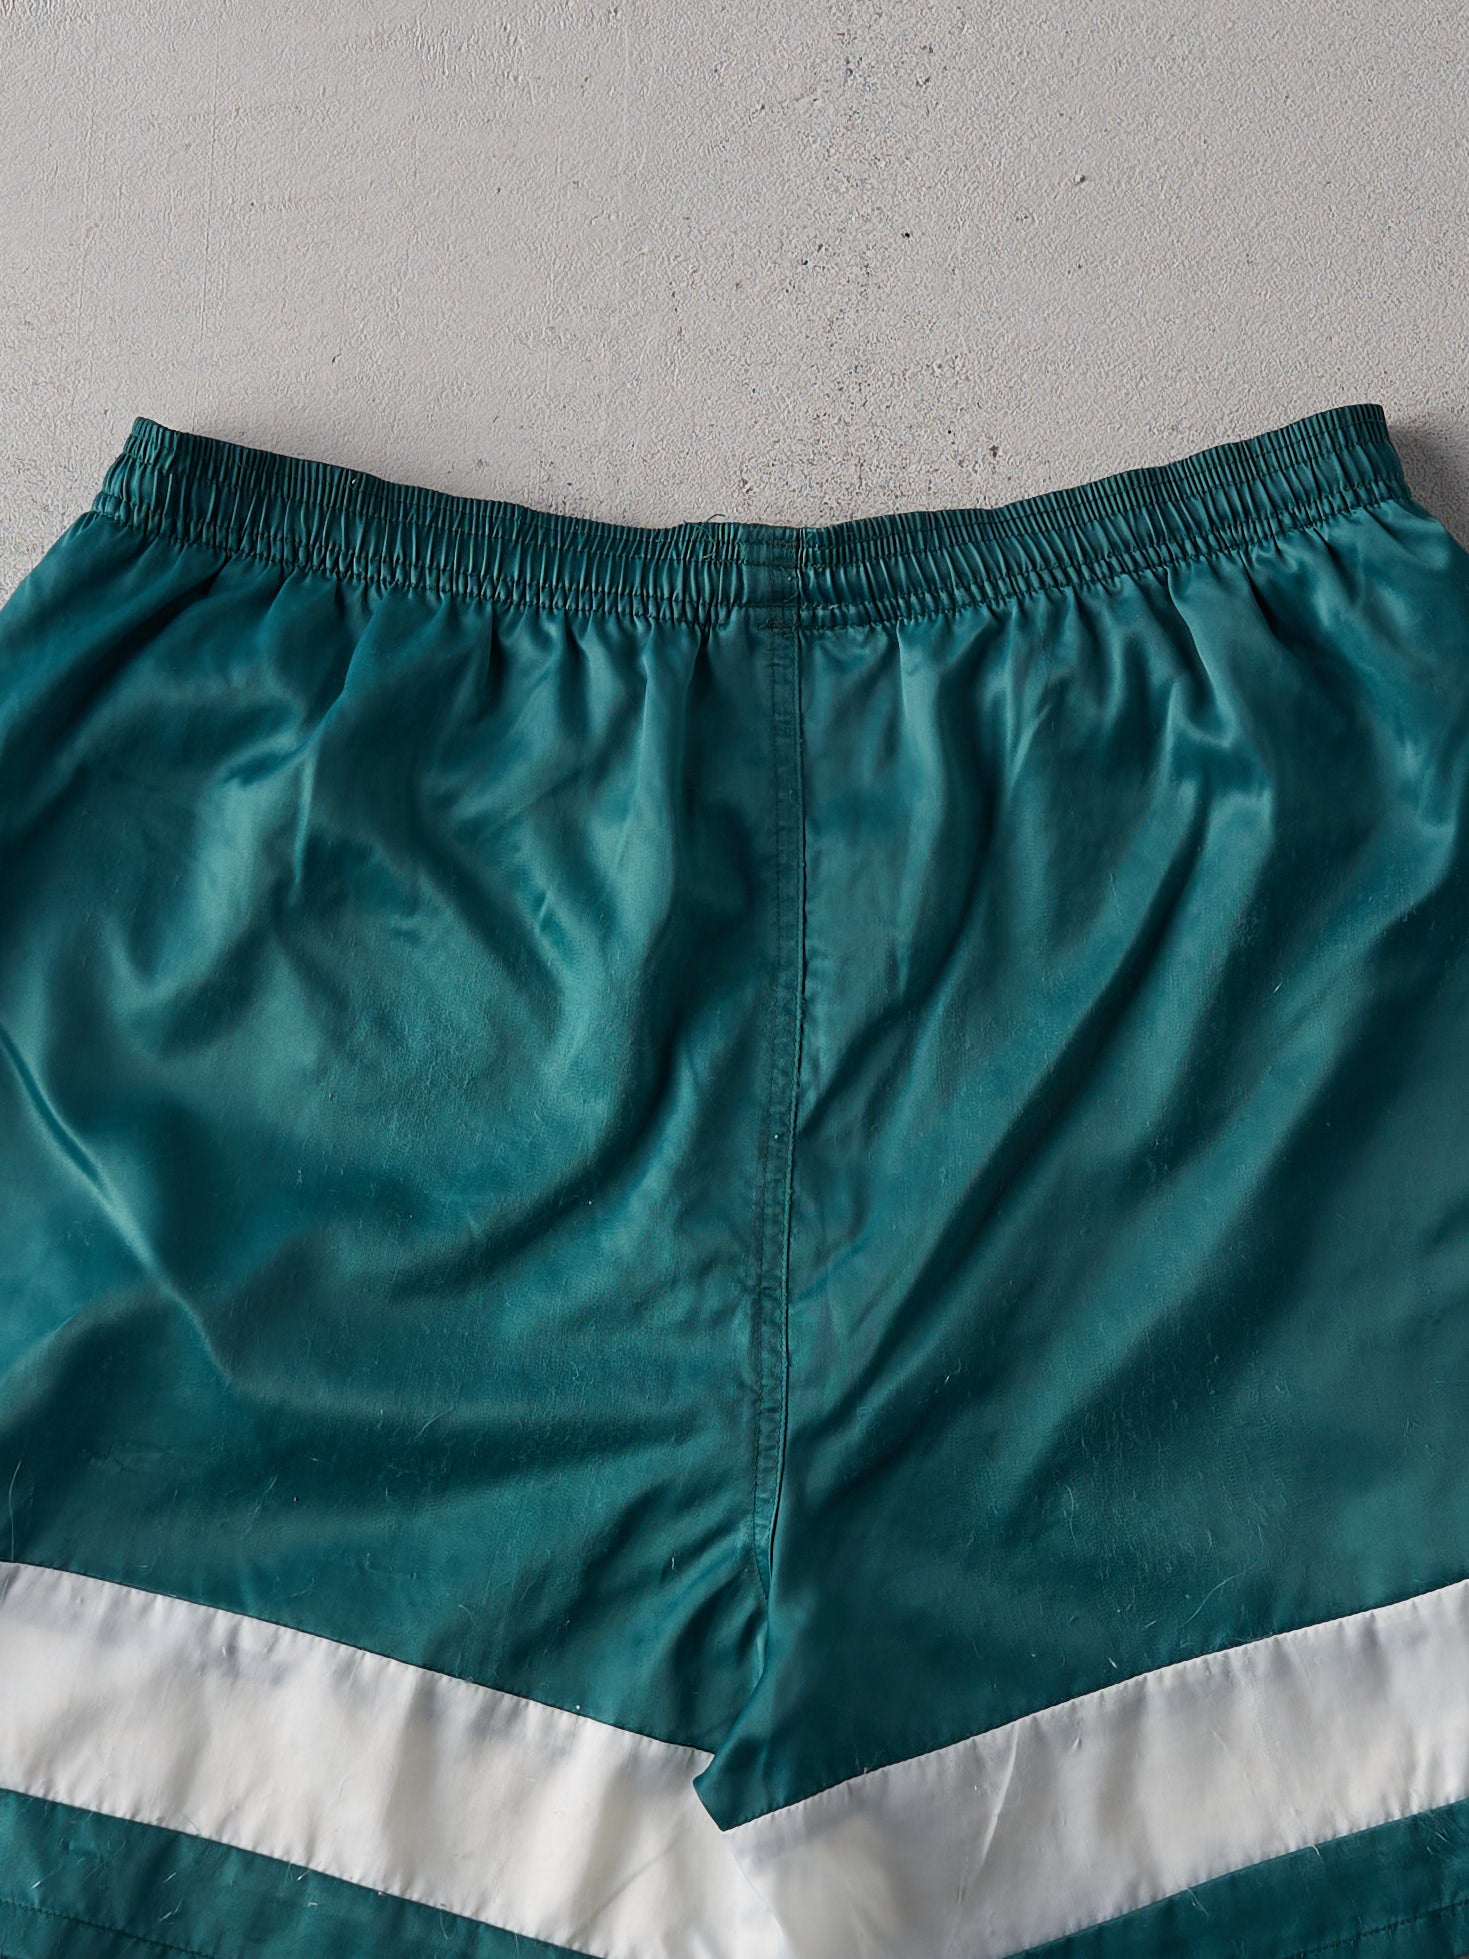 Vintage 80s Green and White Adidas Athletic Shorts (33x6)